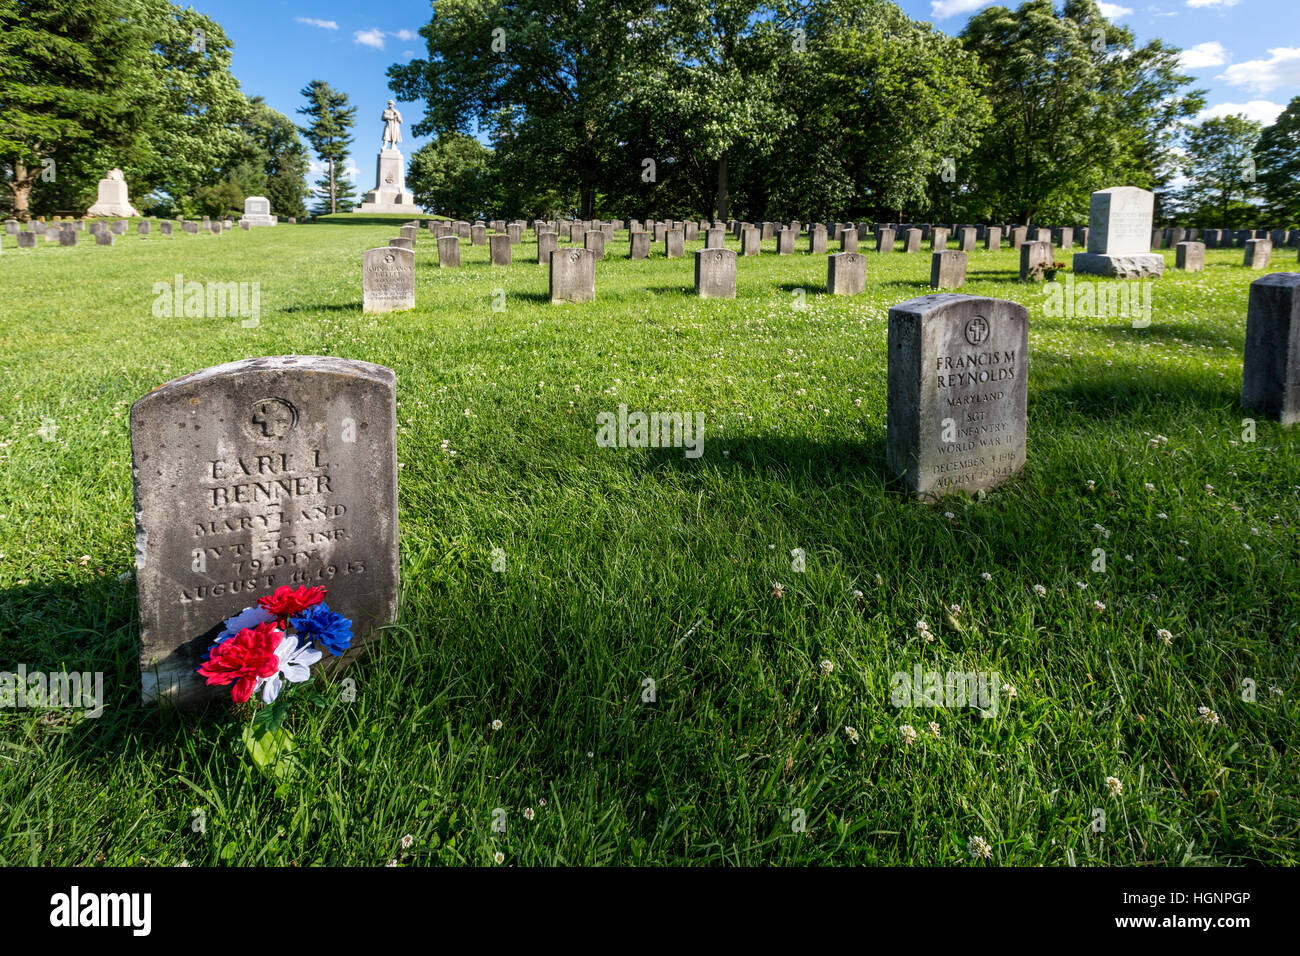 Antietam National Cemetery, Sharpsburg, Maryland.  Graves of World War II Veterans.  Private Soldier Monument in background. Stock Photo